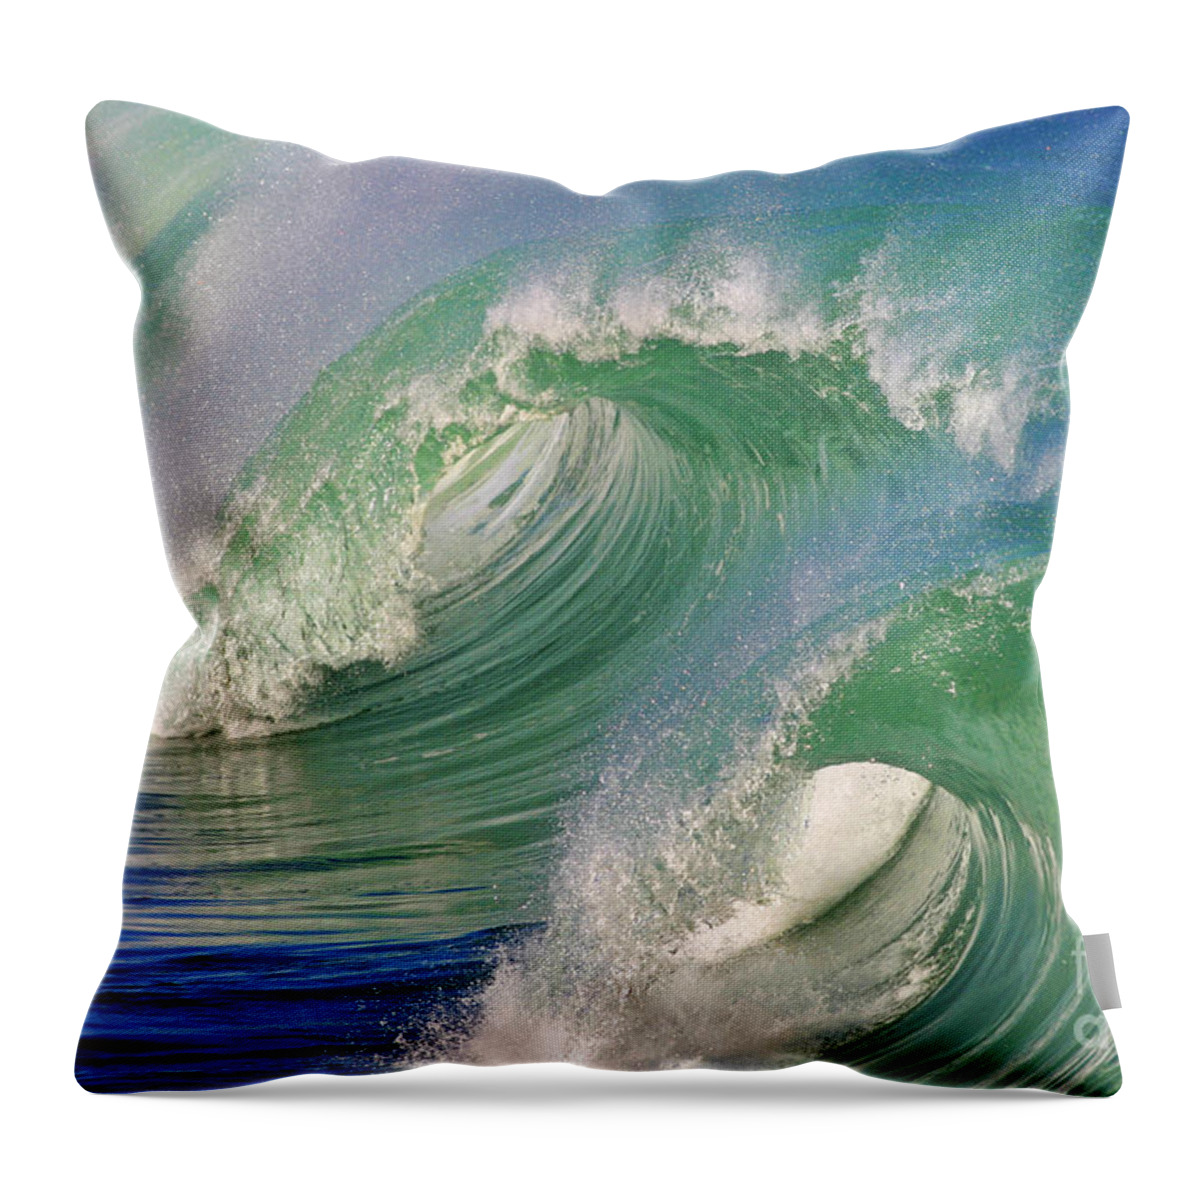 Ocean Throw Pillow featuring the photograph Double Barrel by Paul Topp